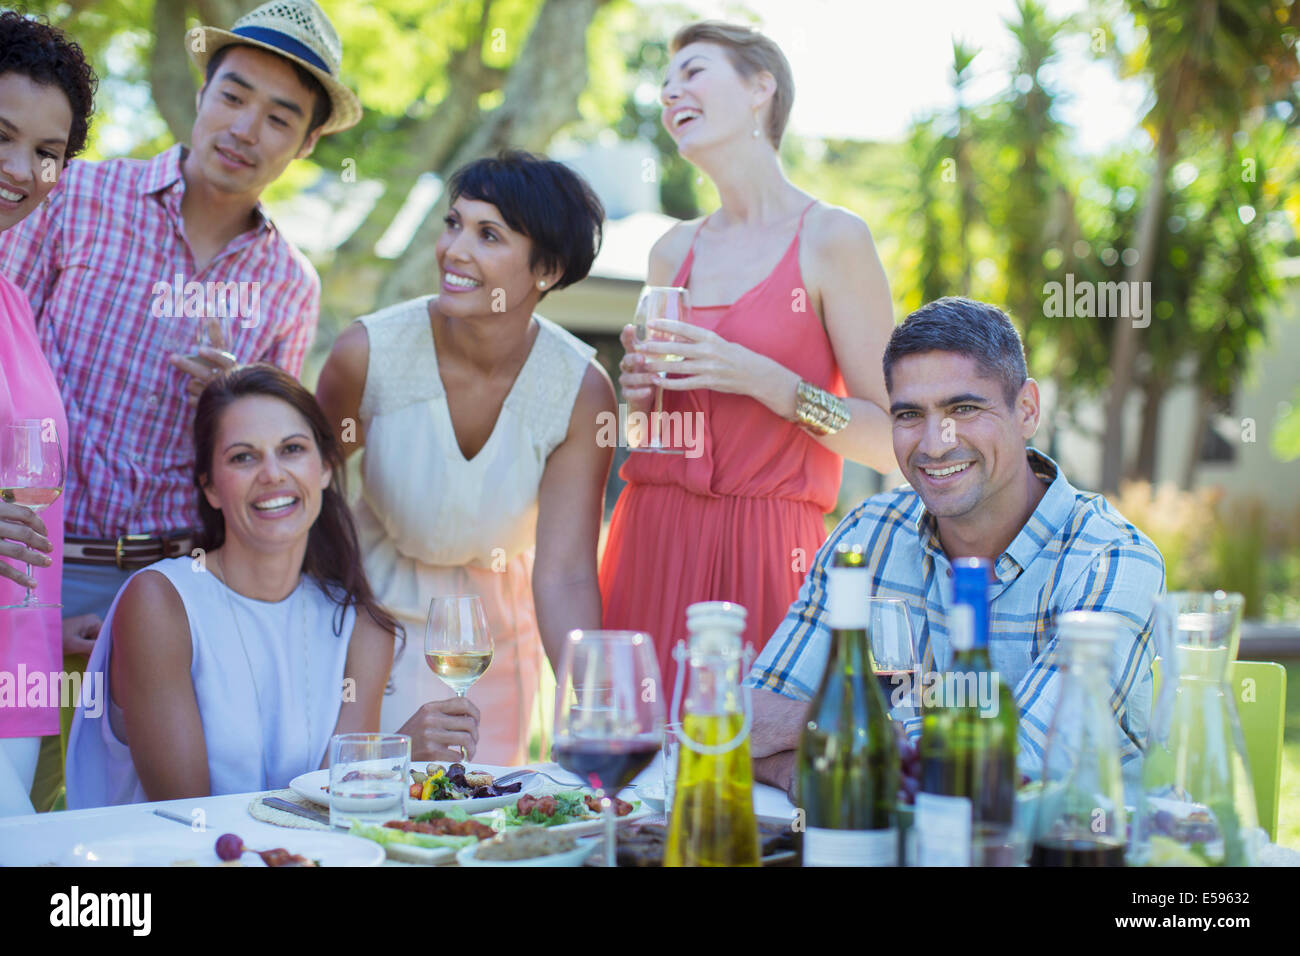 Friends relaxing at table outdoors Stock Photo